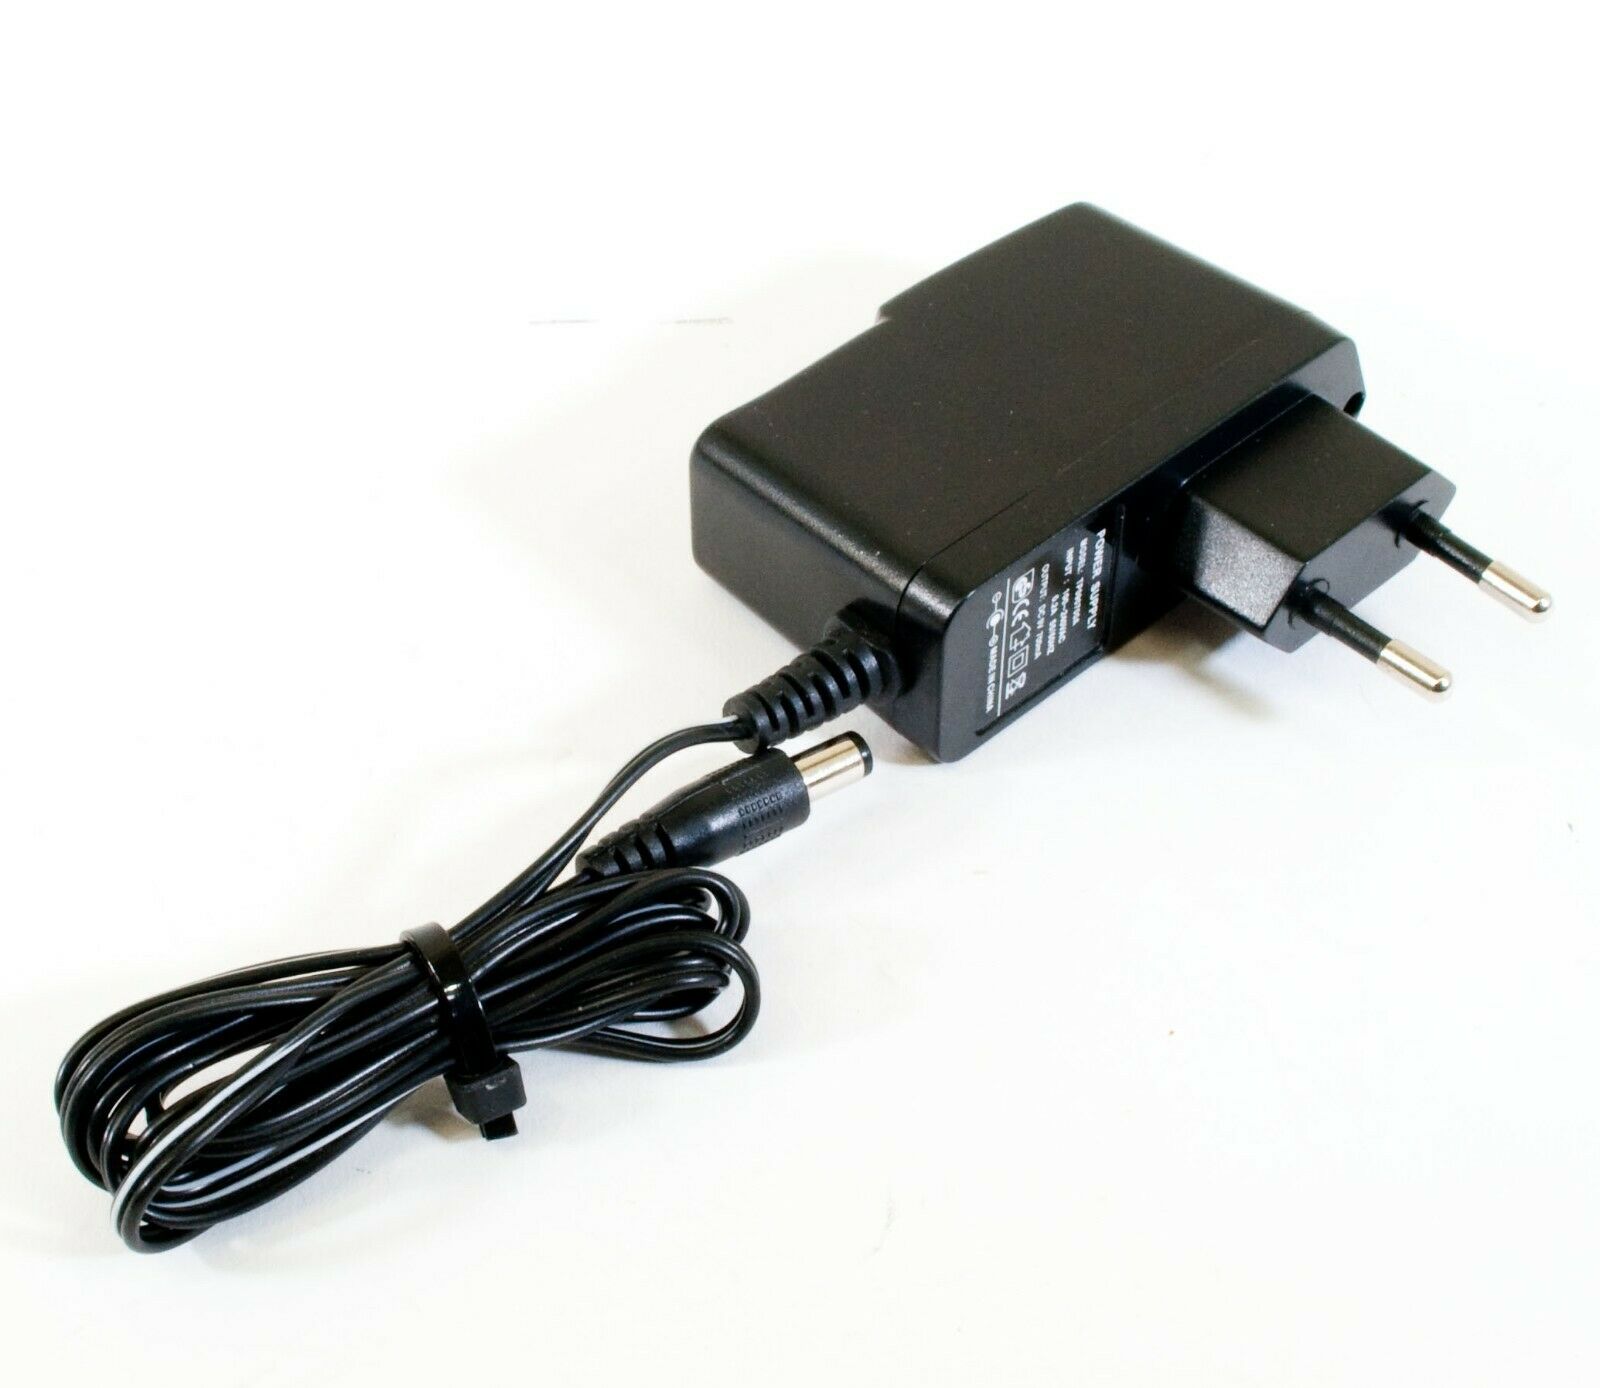 GS TP090700A AC Adapter 9V 700mA Original Charger Power Supply Output Current: